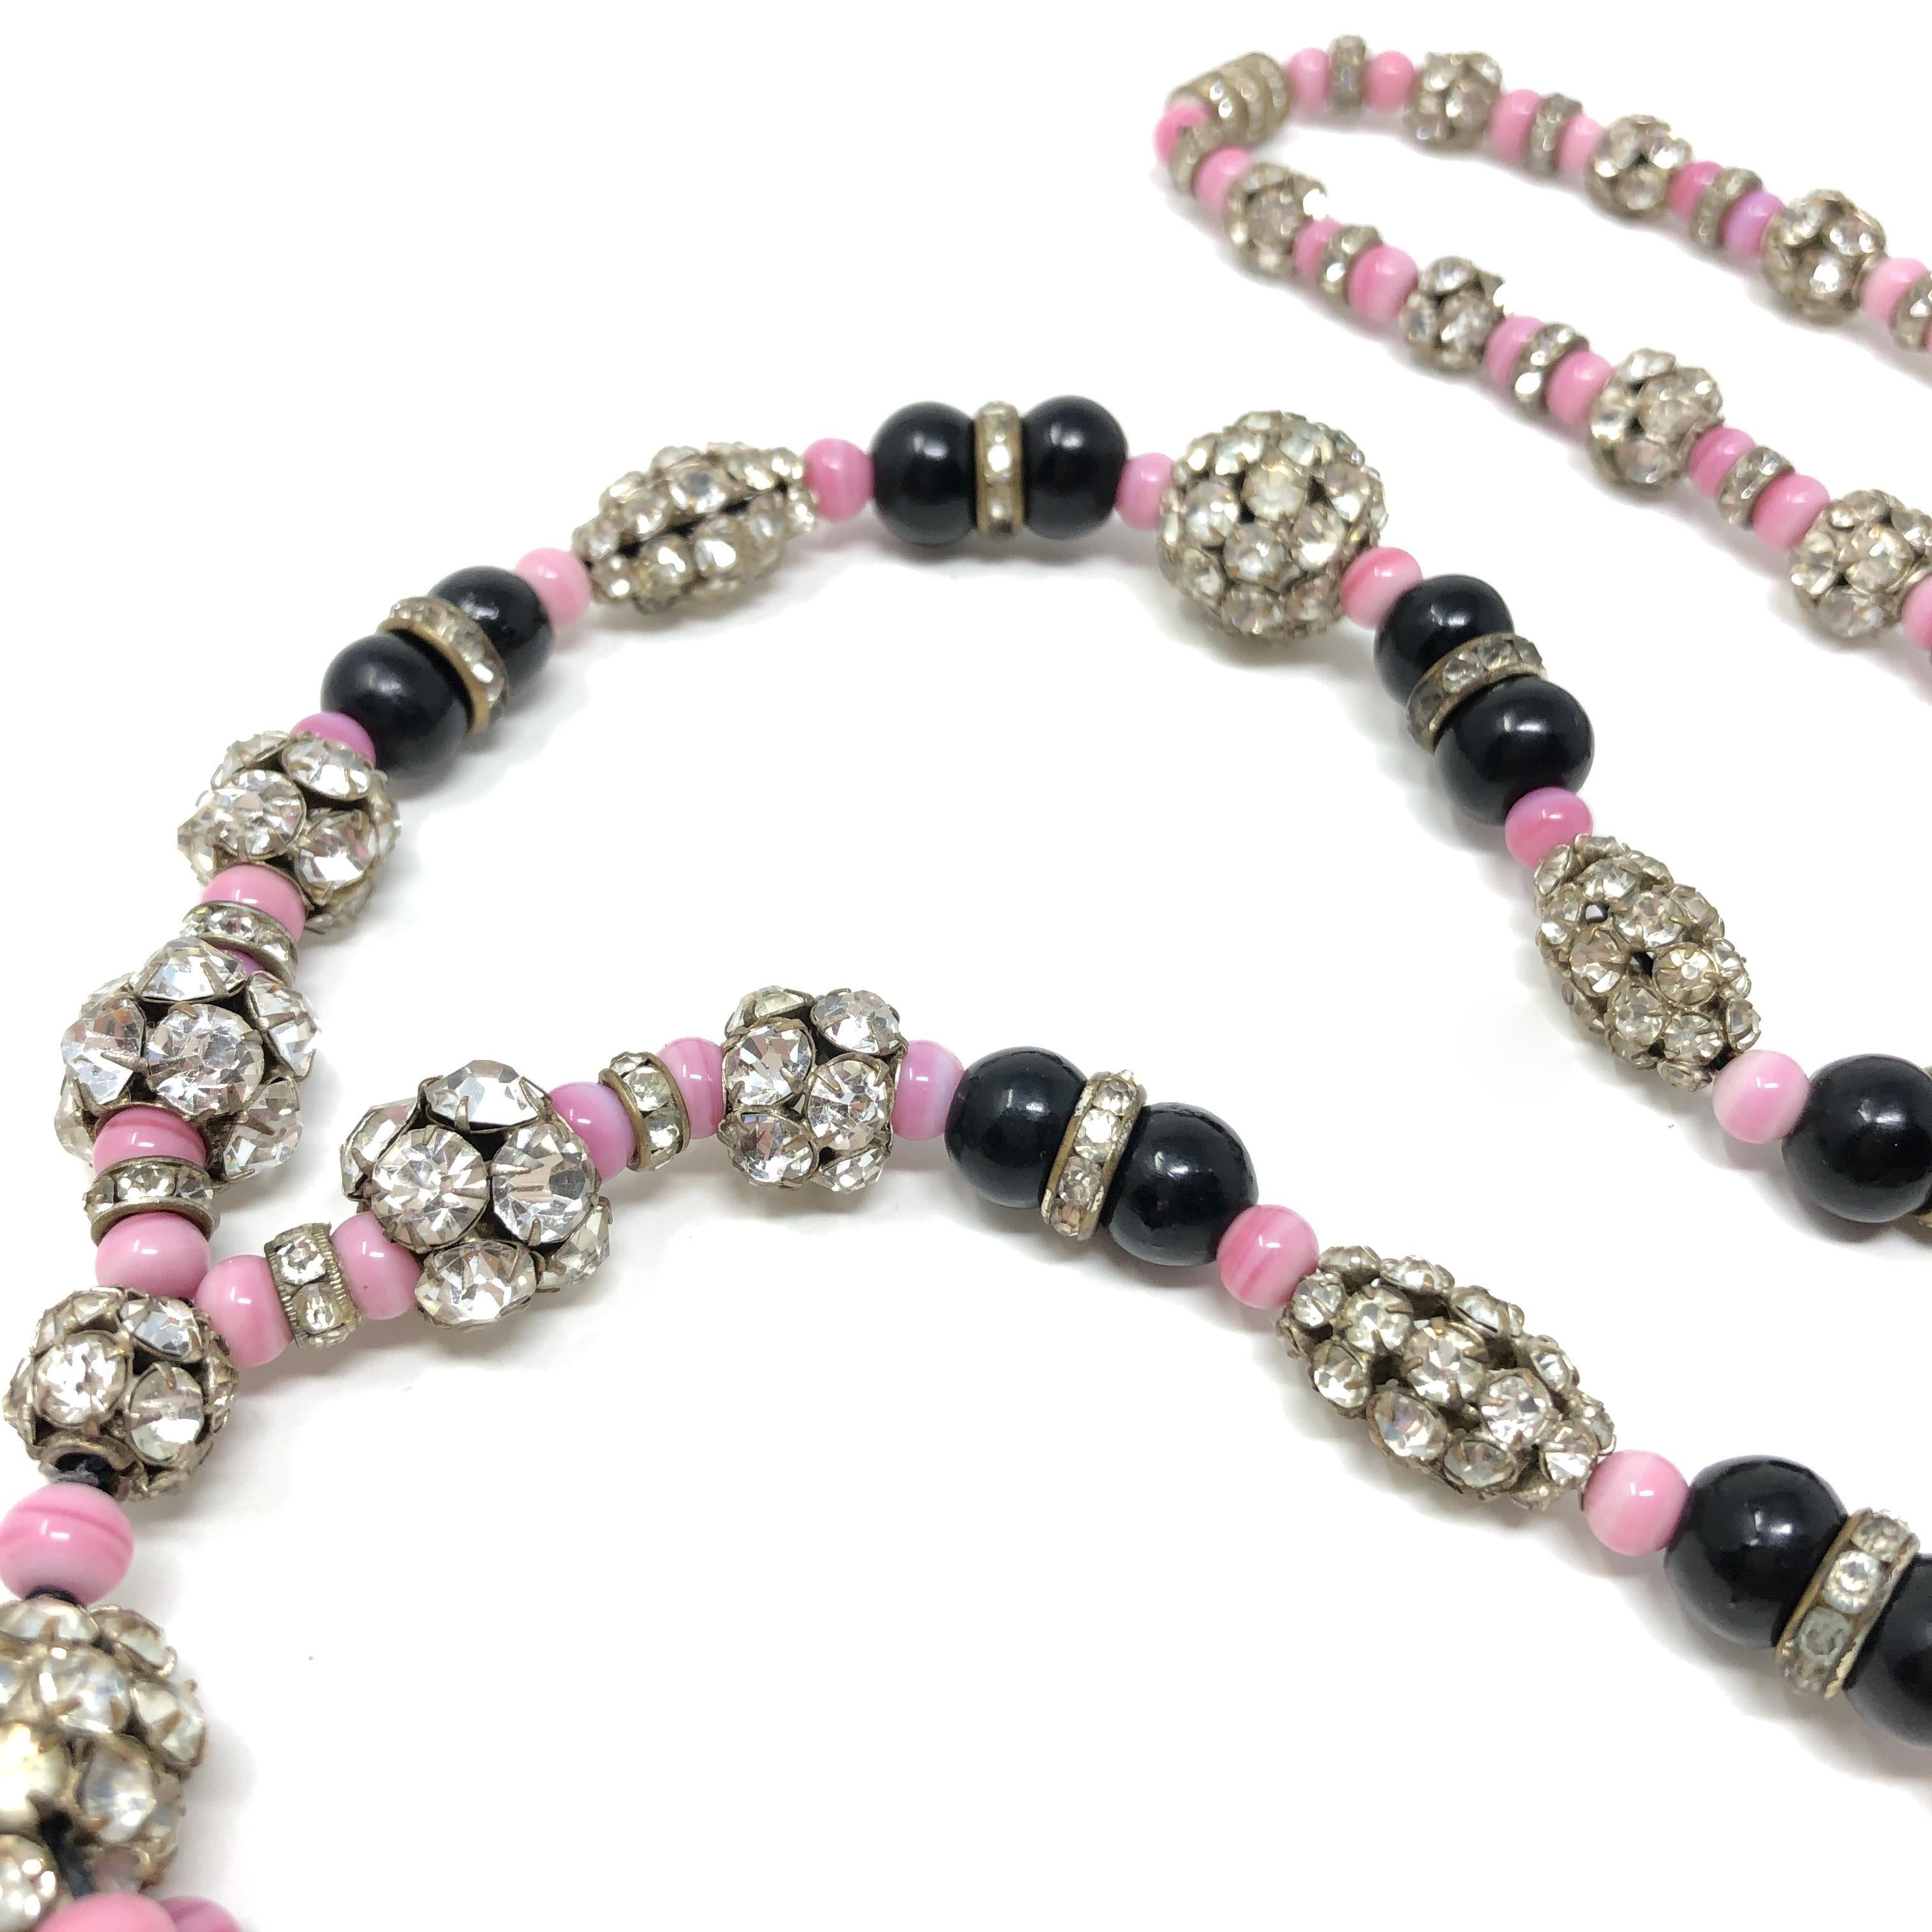 Women's 1920s Art Deco Pink and Black Glass Bead Rhinestone Vintage Flapper Necklace For Sale